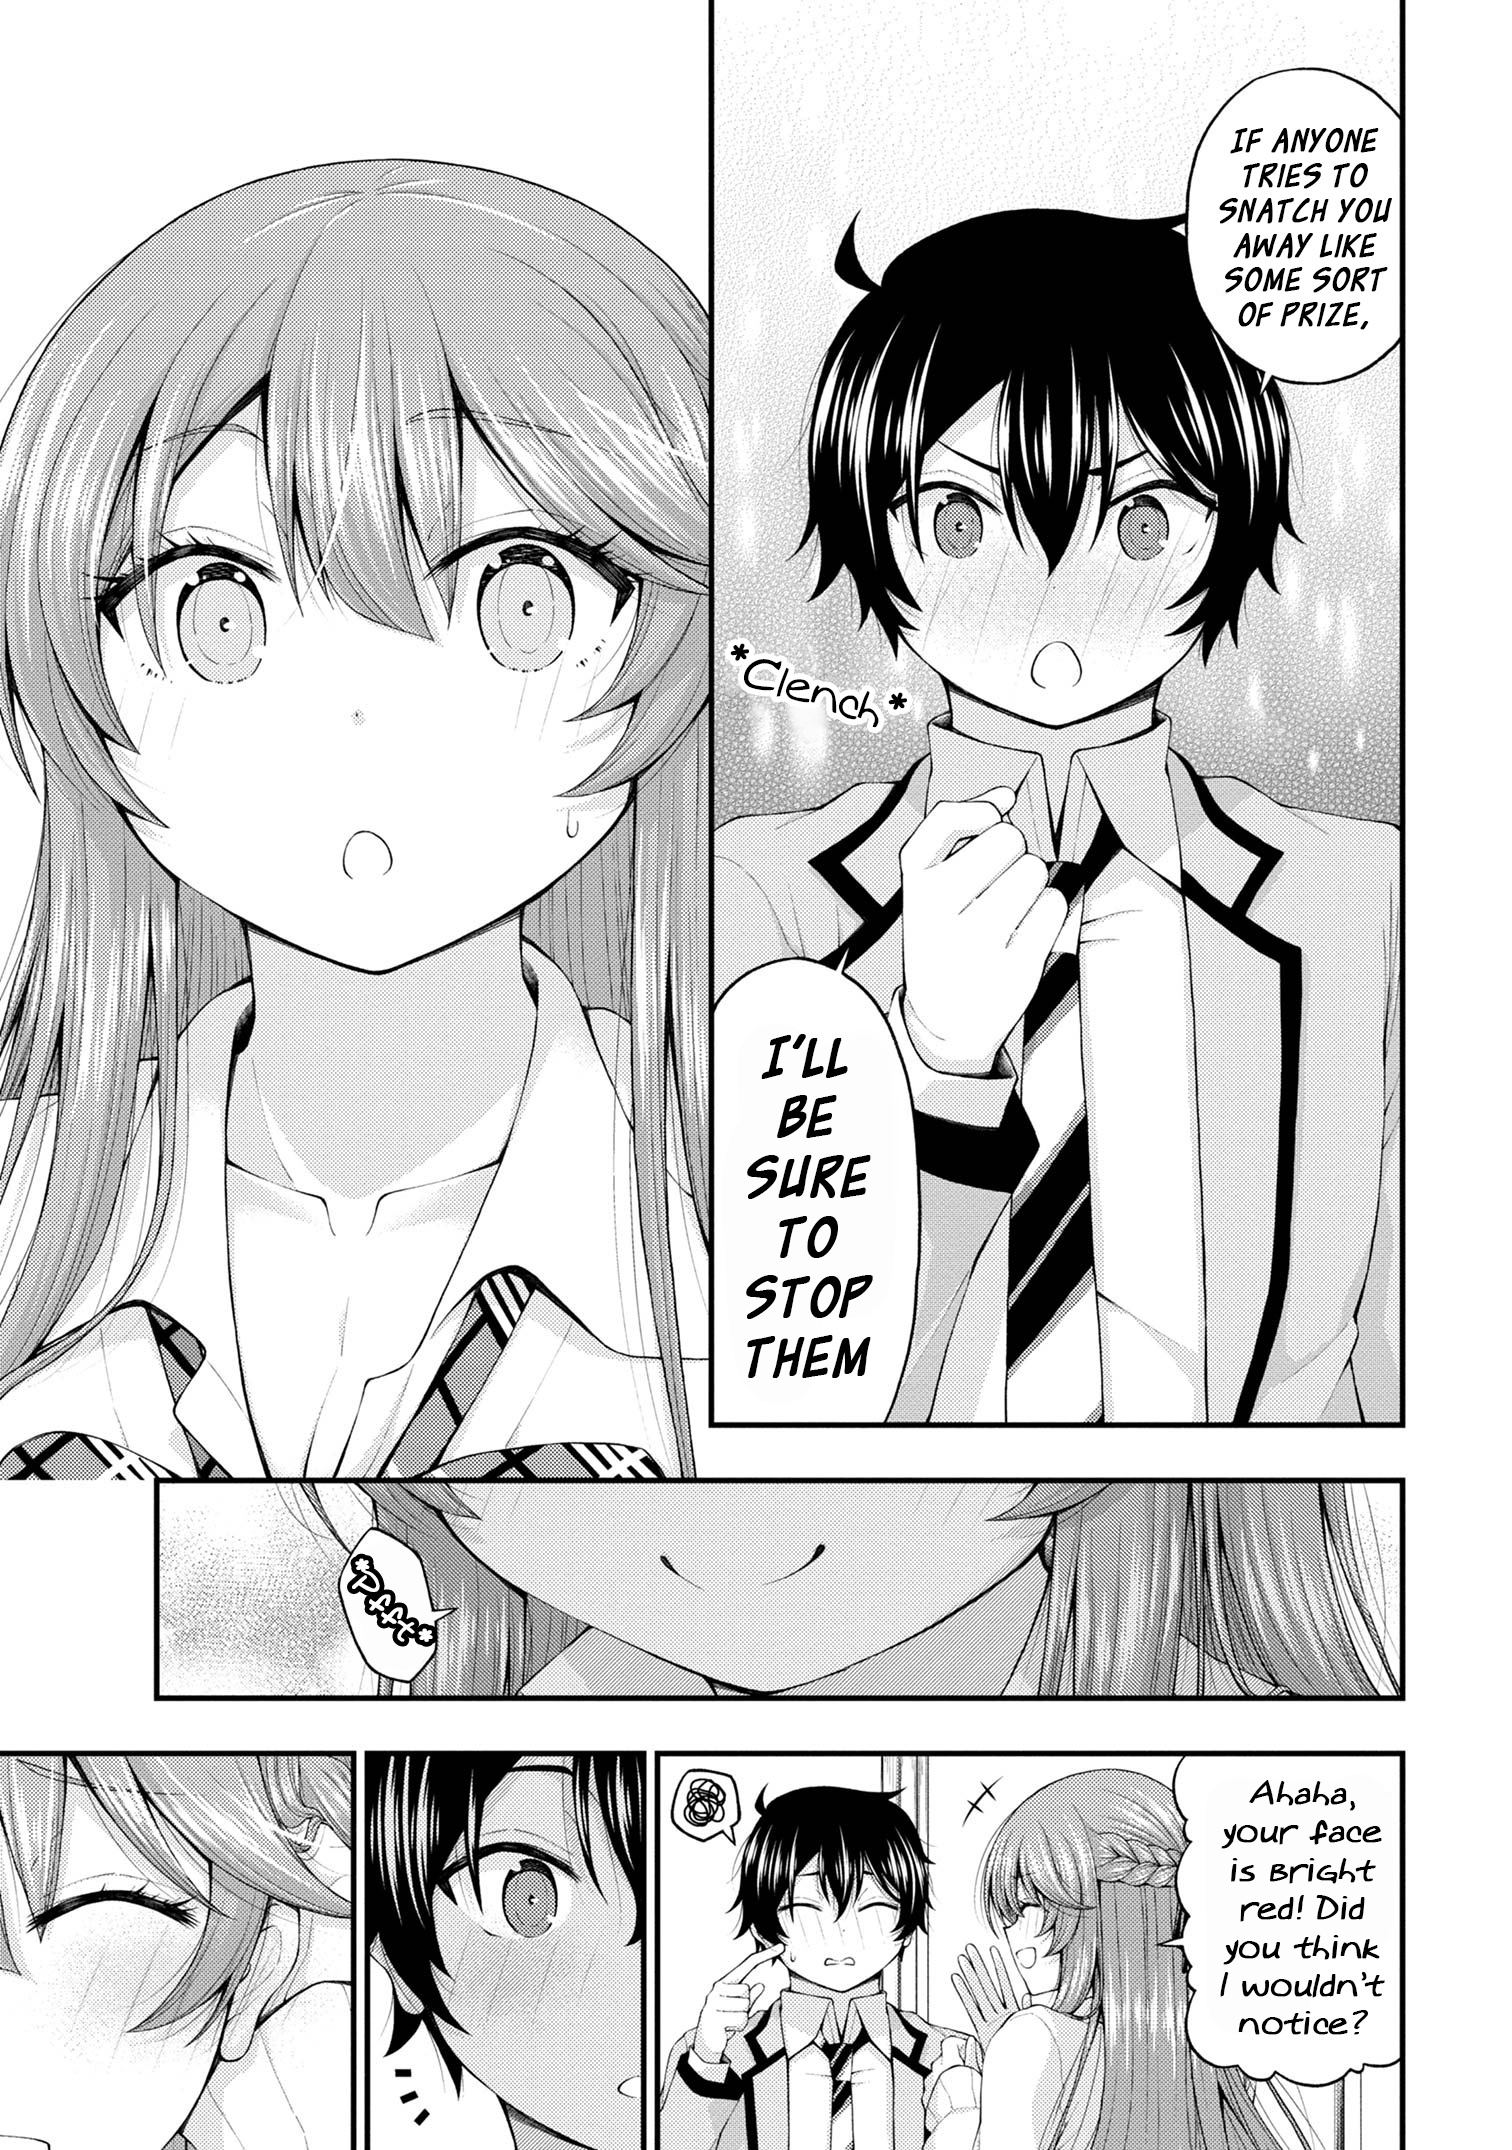 The Gal Who Was Meant To Confess To Me As A Game Punishment Has Apparently Fallen In Love With Me Chapter 7.5 #21